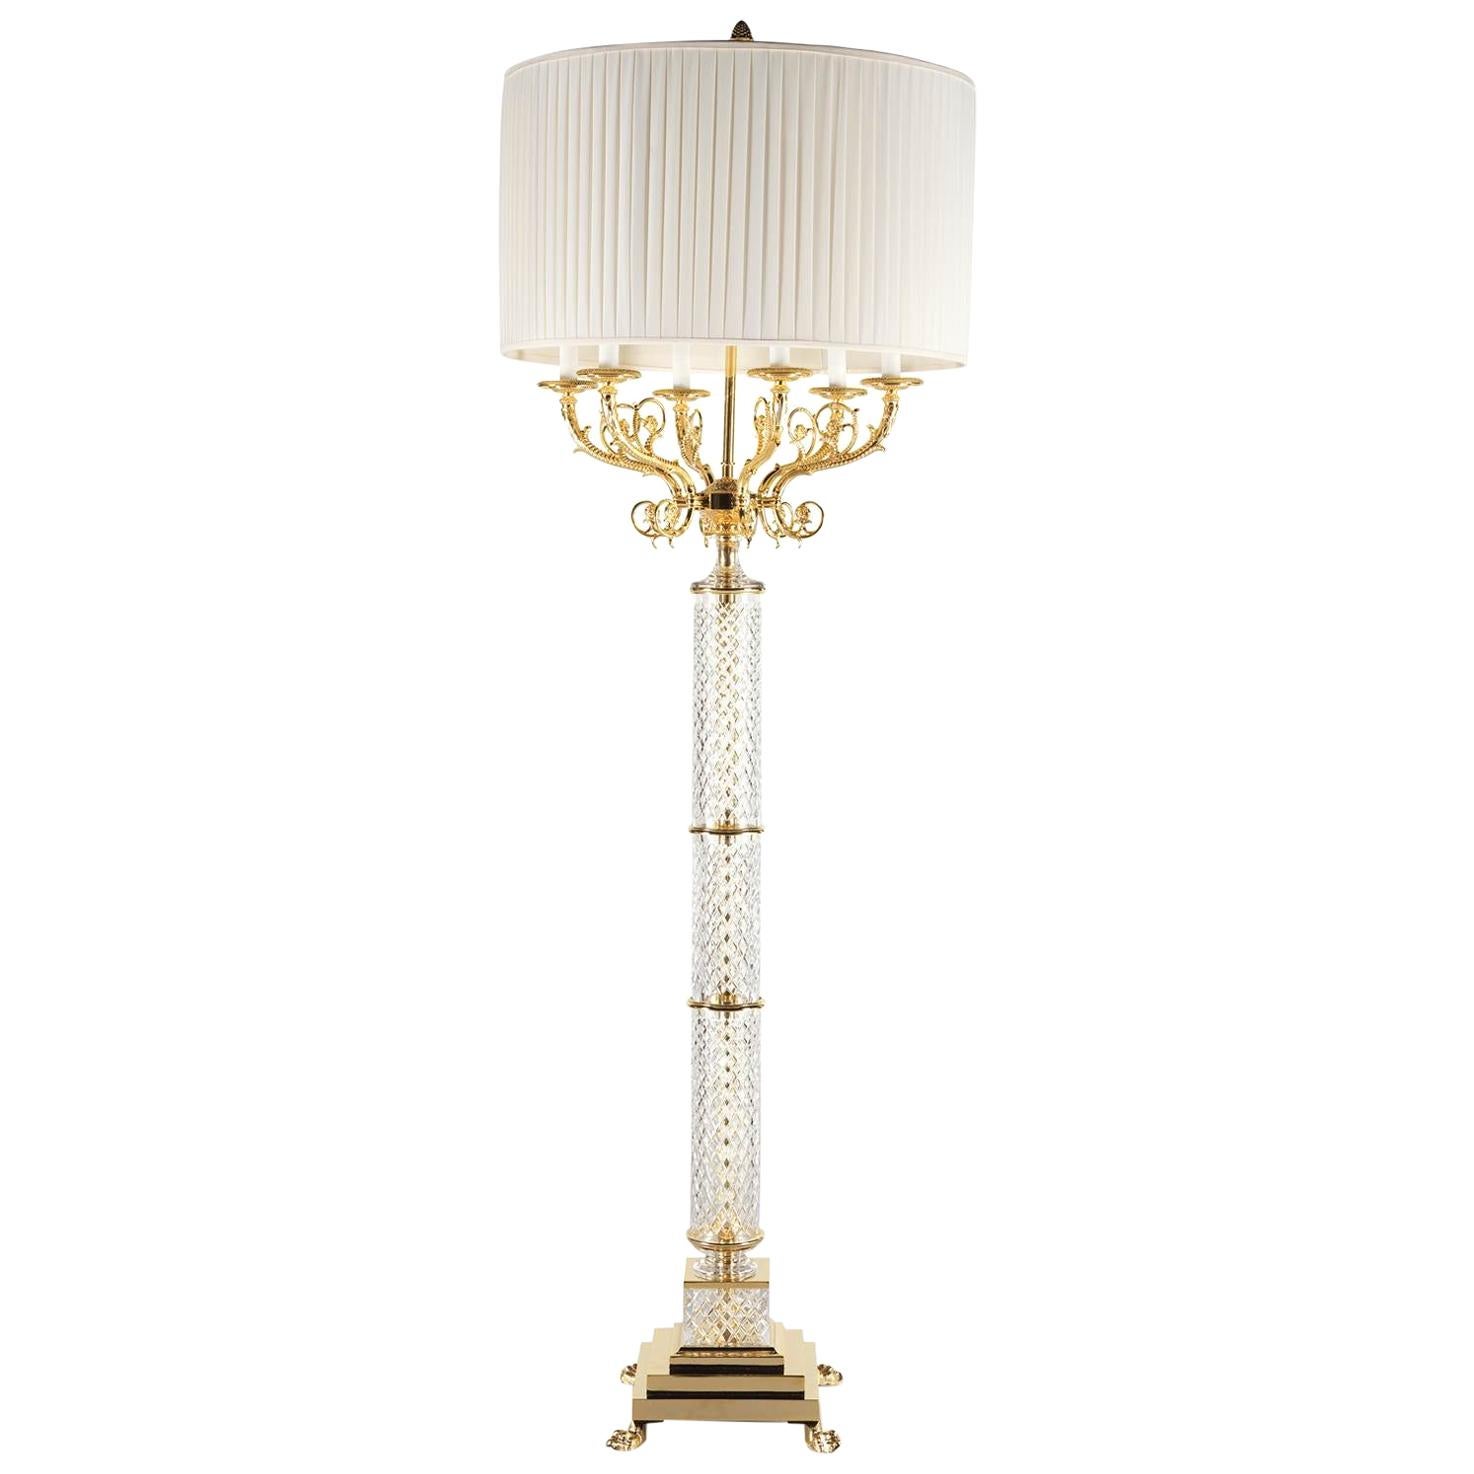 L034/F Italian Floor Lamp in Crystal and Finishing Gold 24-Karat by Zanaboni For Sale